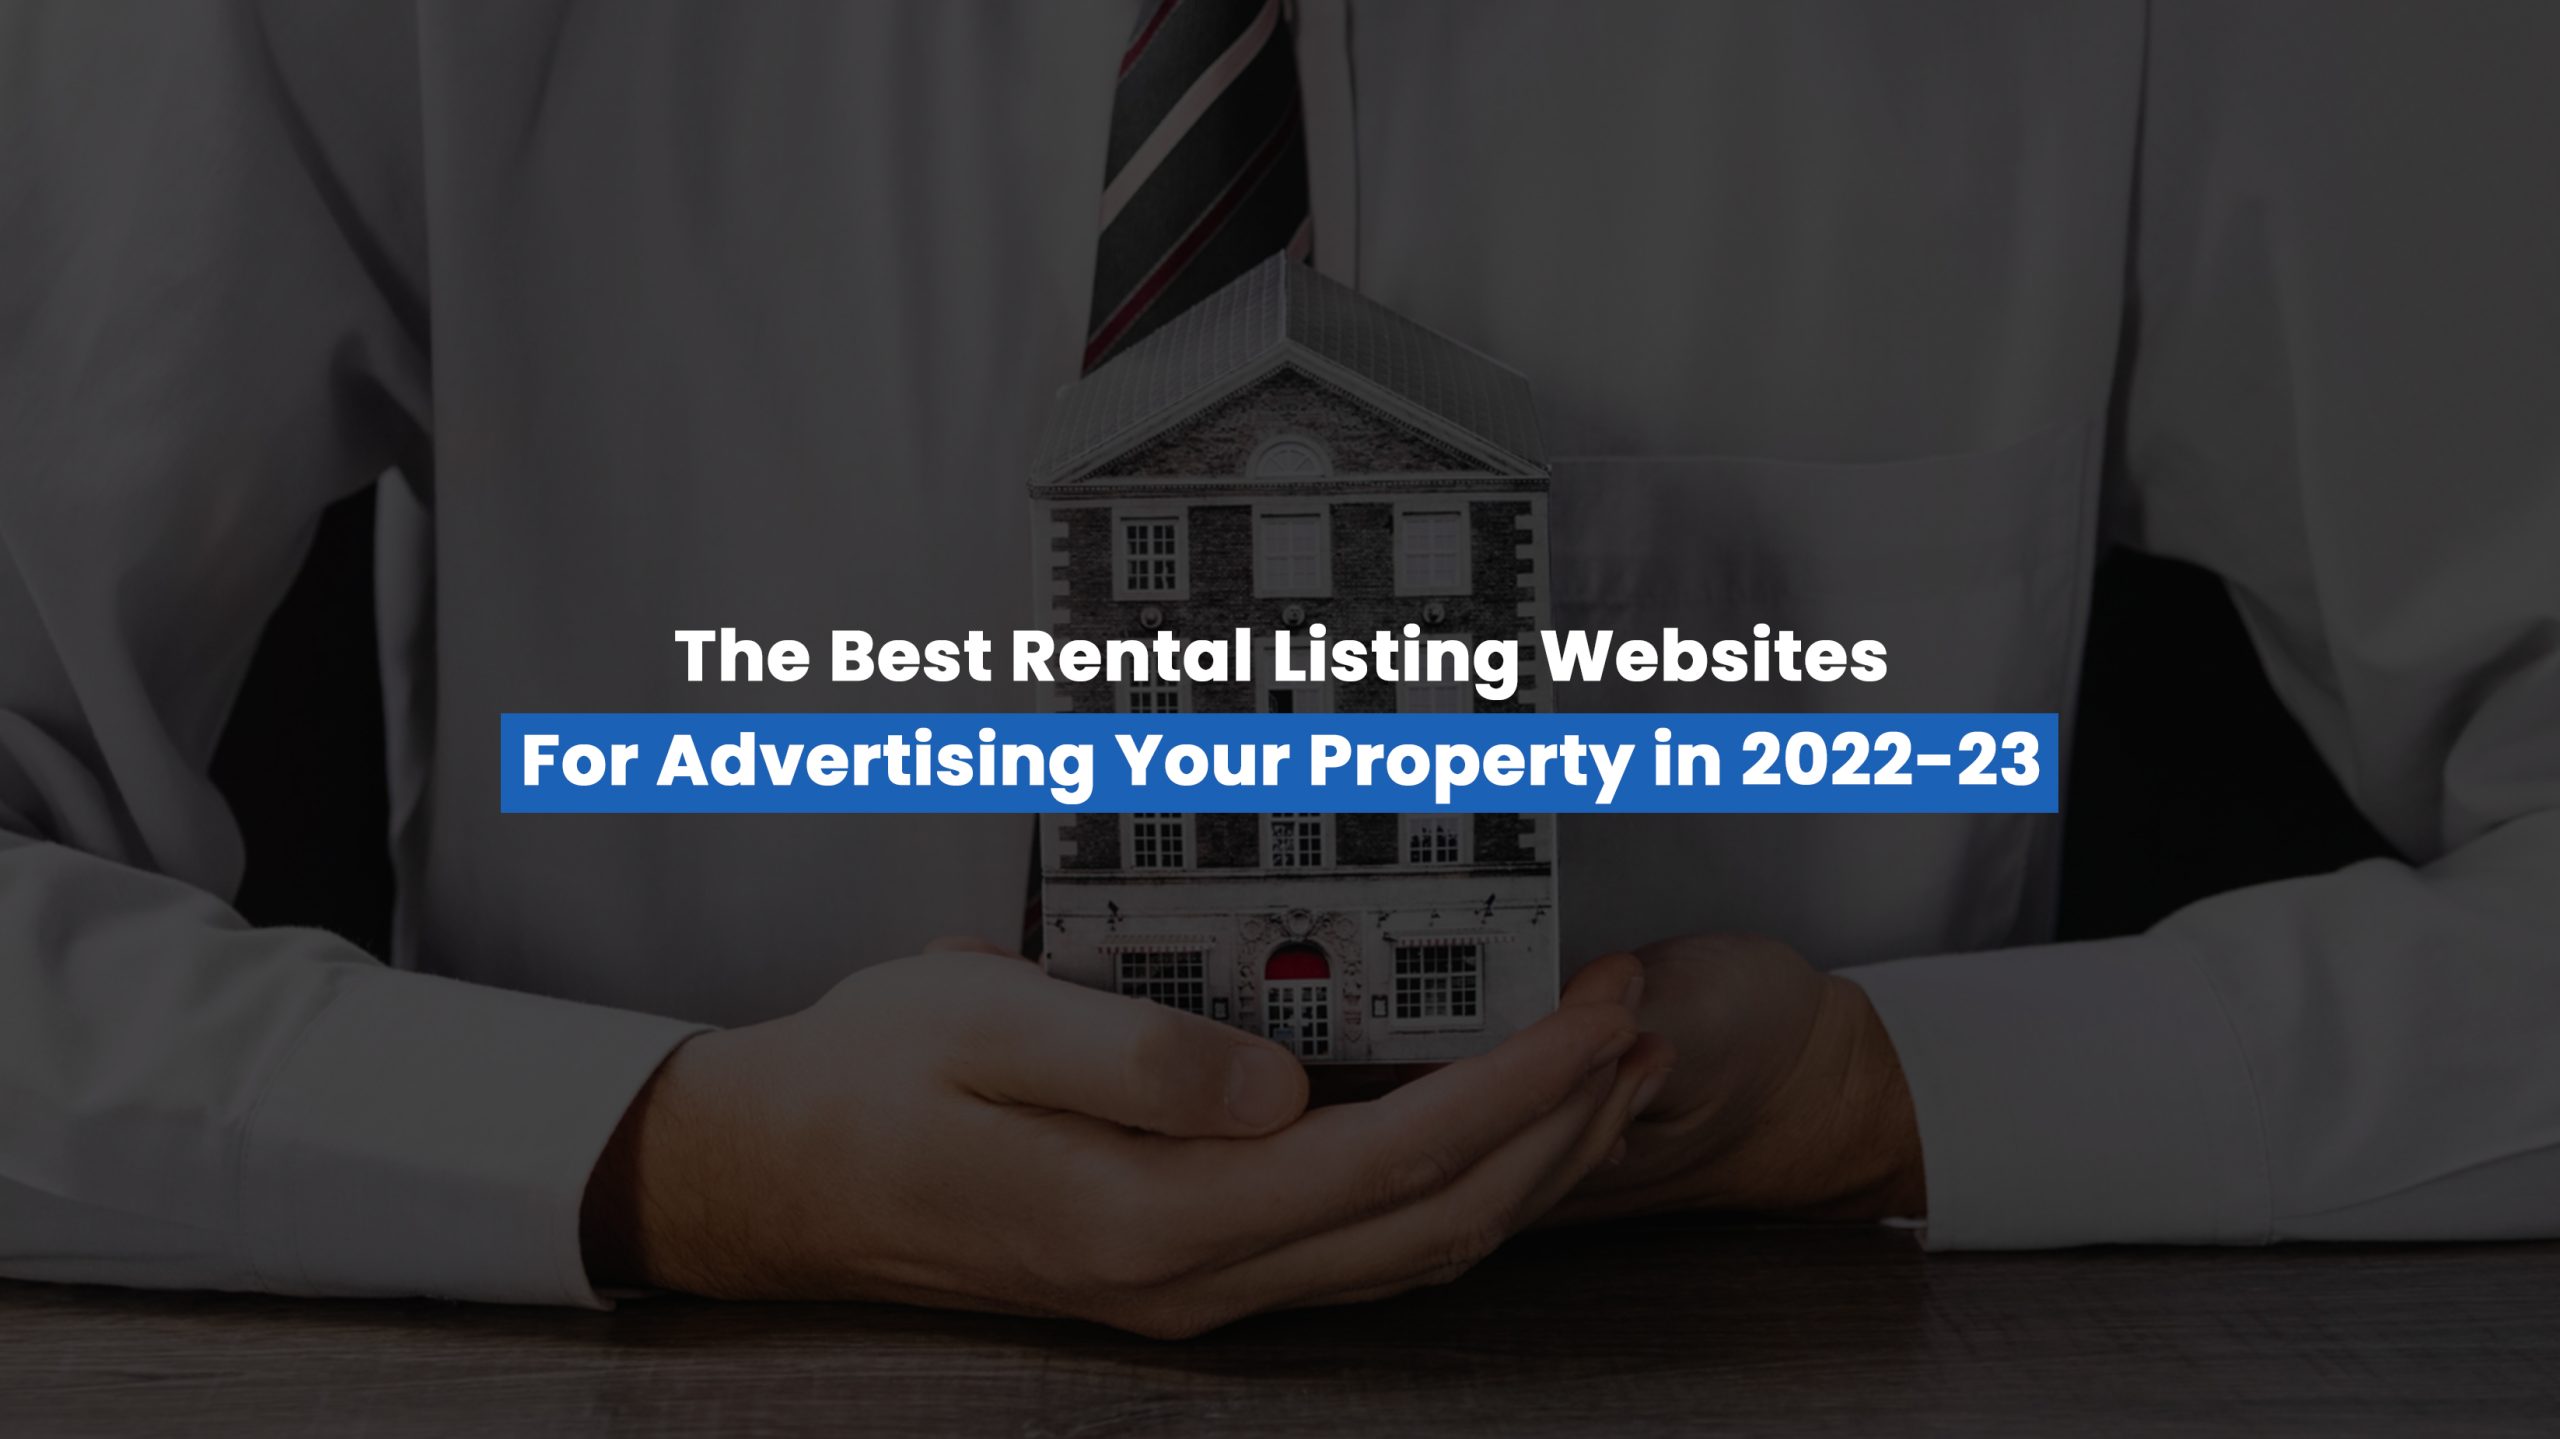 The Best Rental Listing Websites for Advertising Your Property in 2022-23